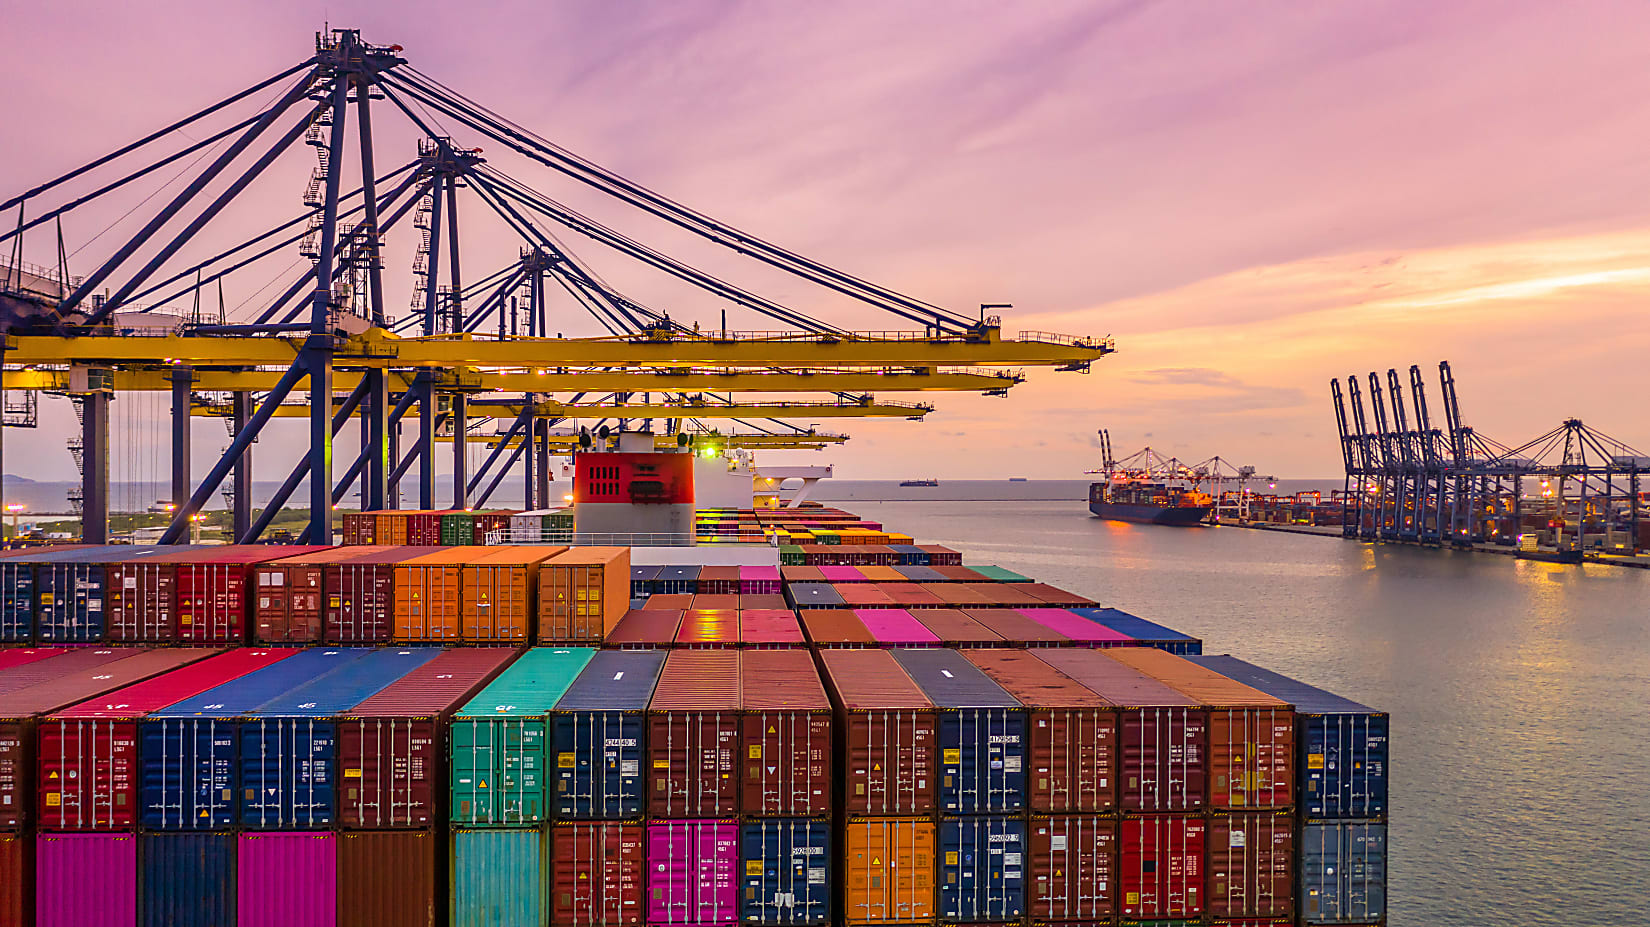 Anybus CompactCom Helps Increase Efficiency in Automated Container Ports